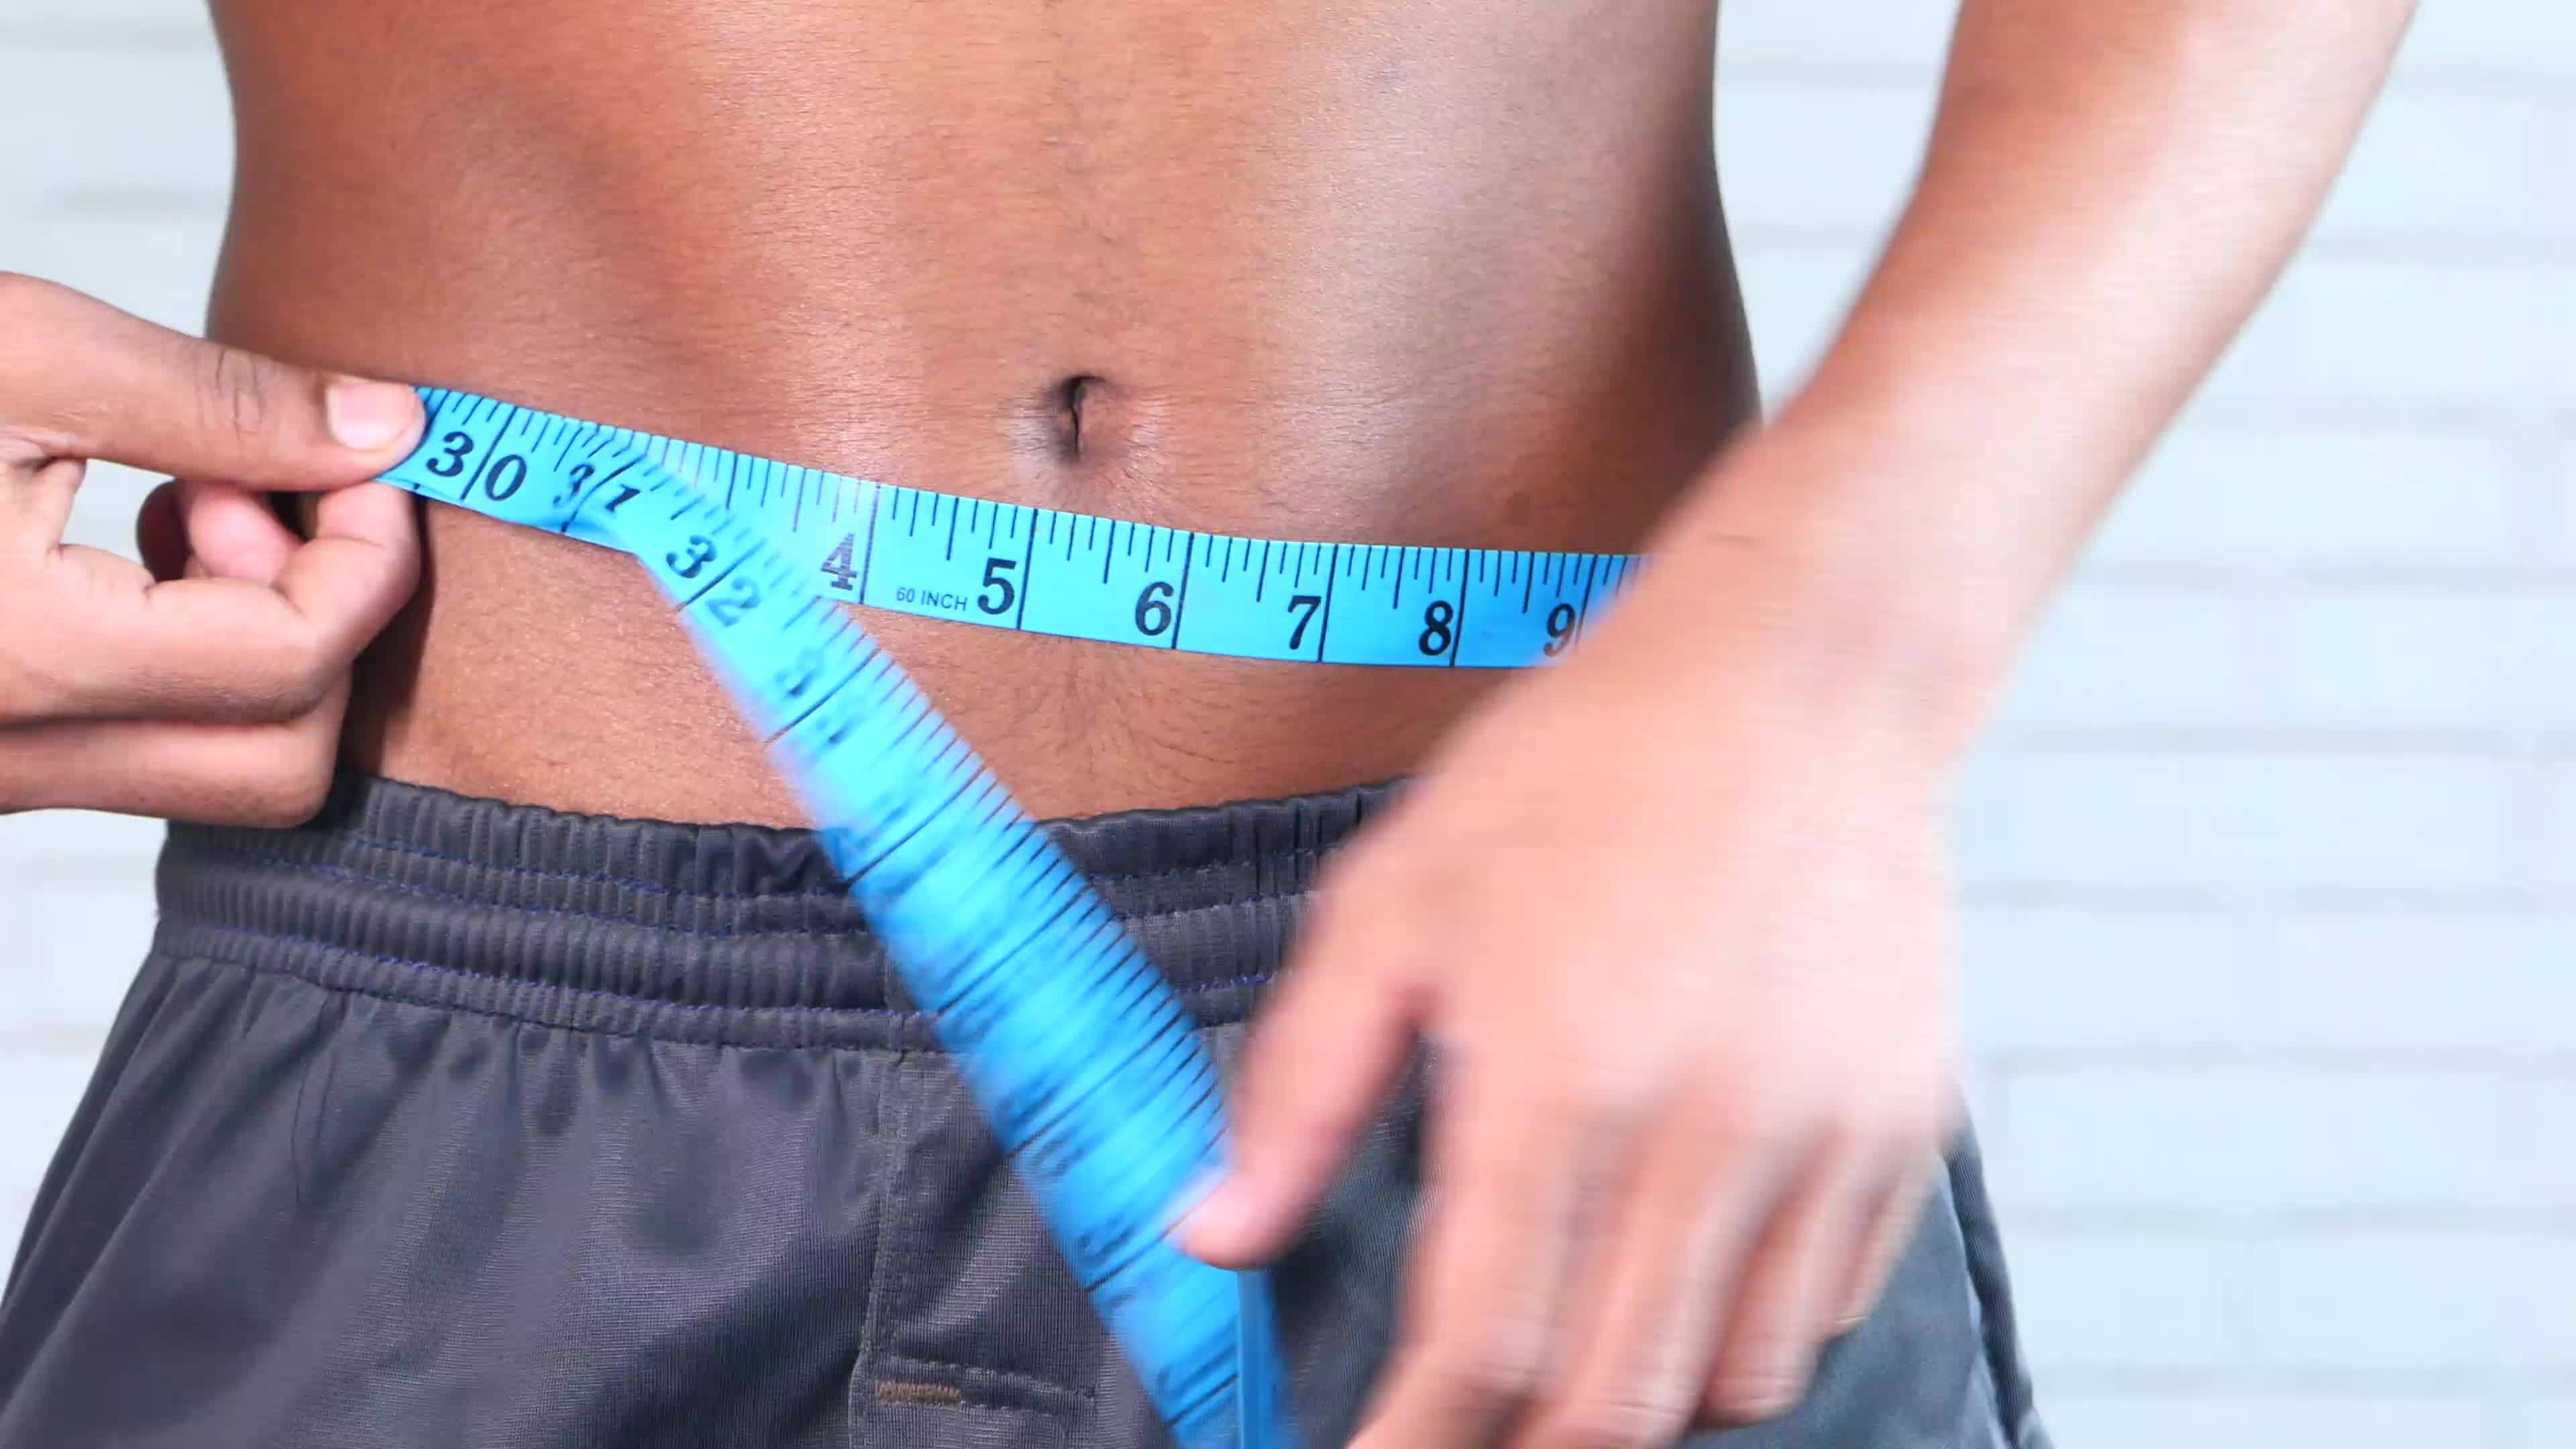 https://static.vecteezy.com/system/resources/thumbnails/021/363/073/original/young-man-measuring-his-waist-with-a-tape-measure-close-up-video.jpg